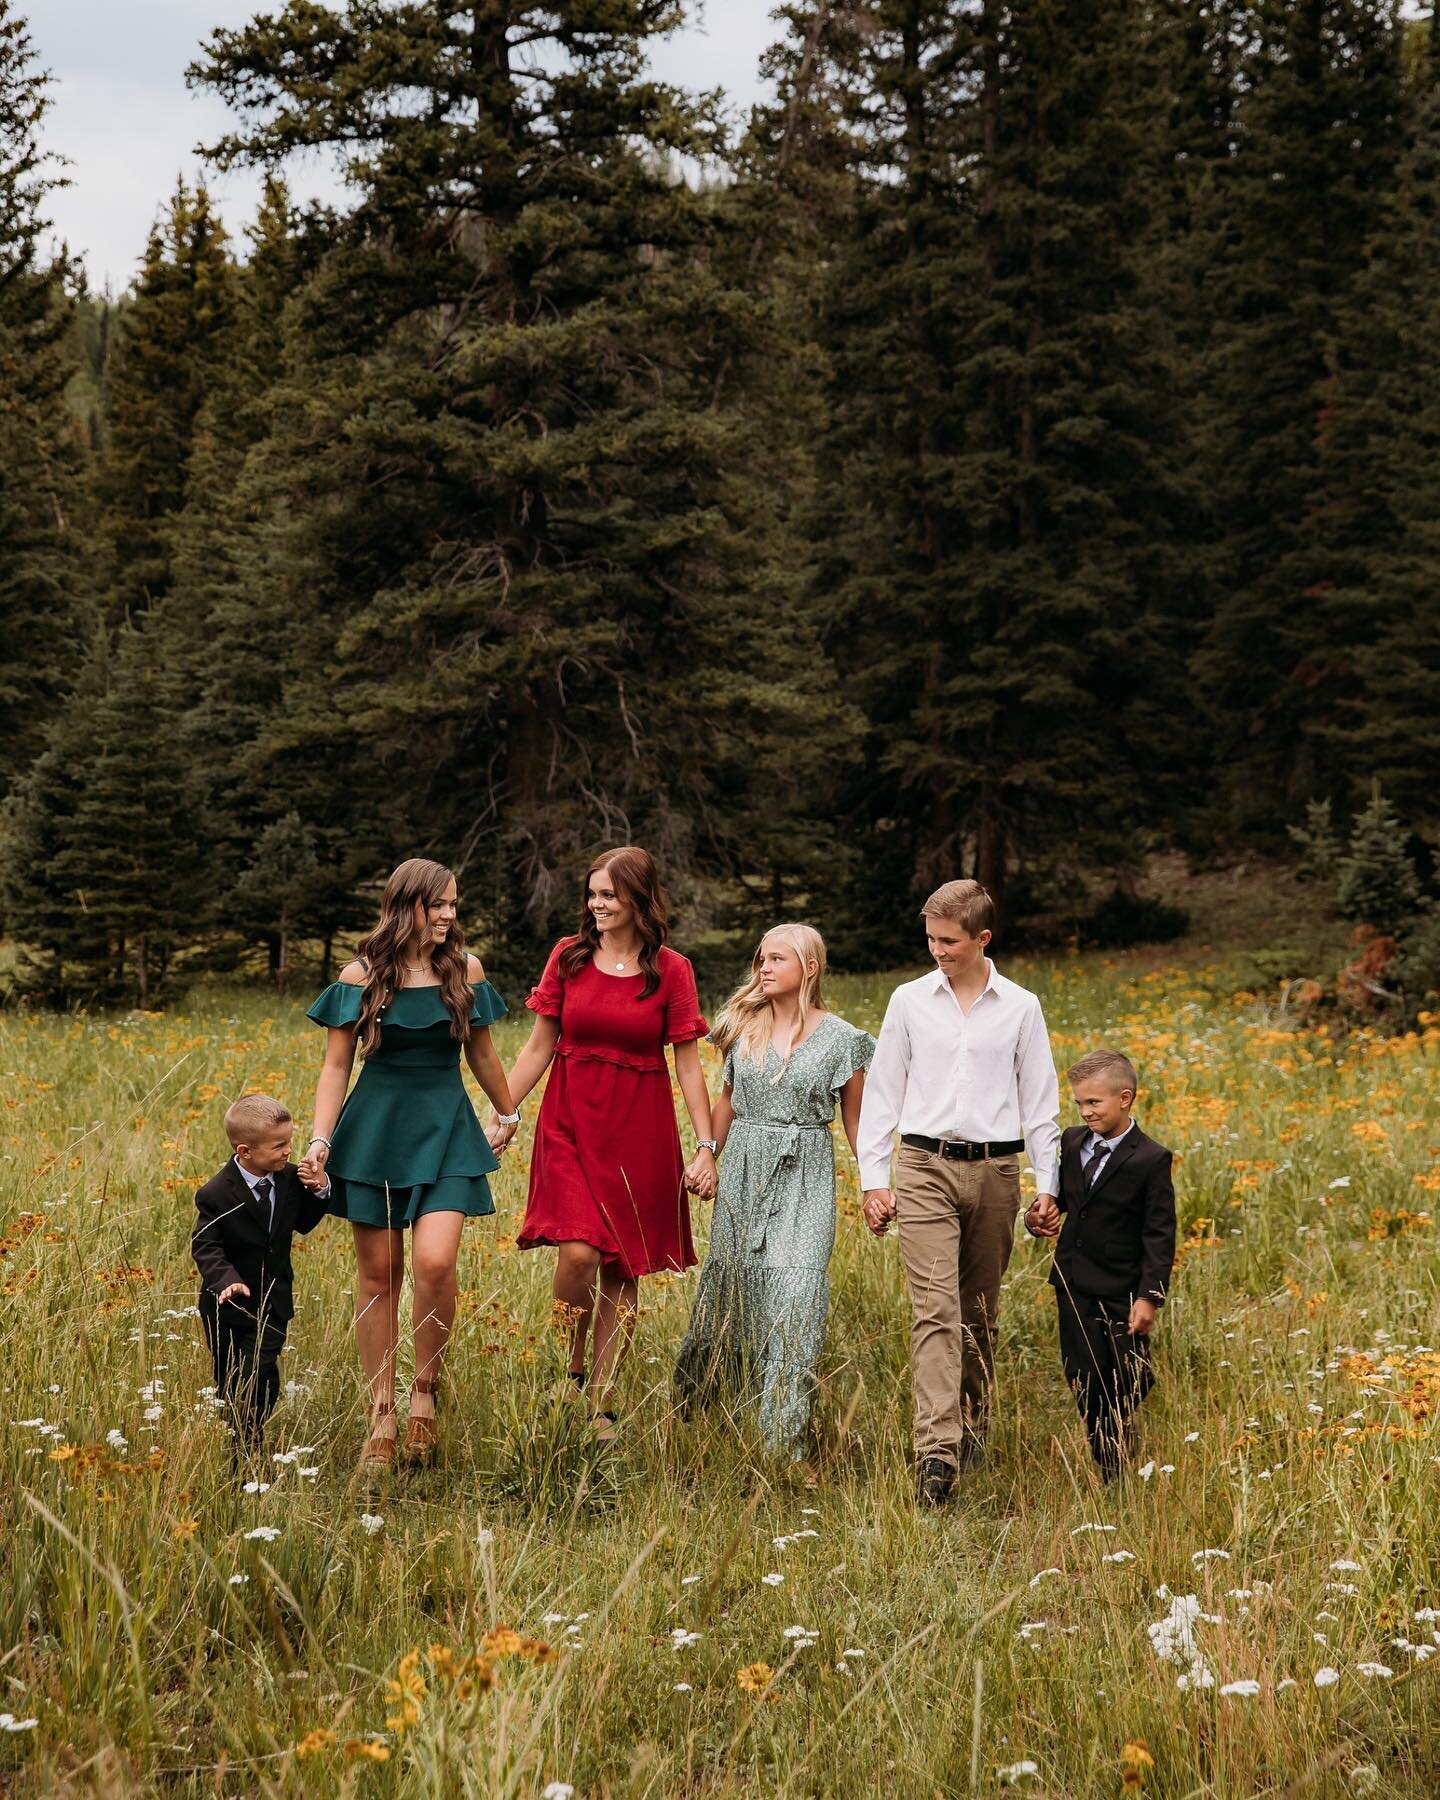 Better together❤️ Pine trees and wildflowers make for the prettiest family photos! The sweetest family!

I have two openings left before I head back to New York! Message me to claim one!